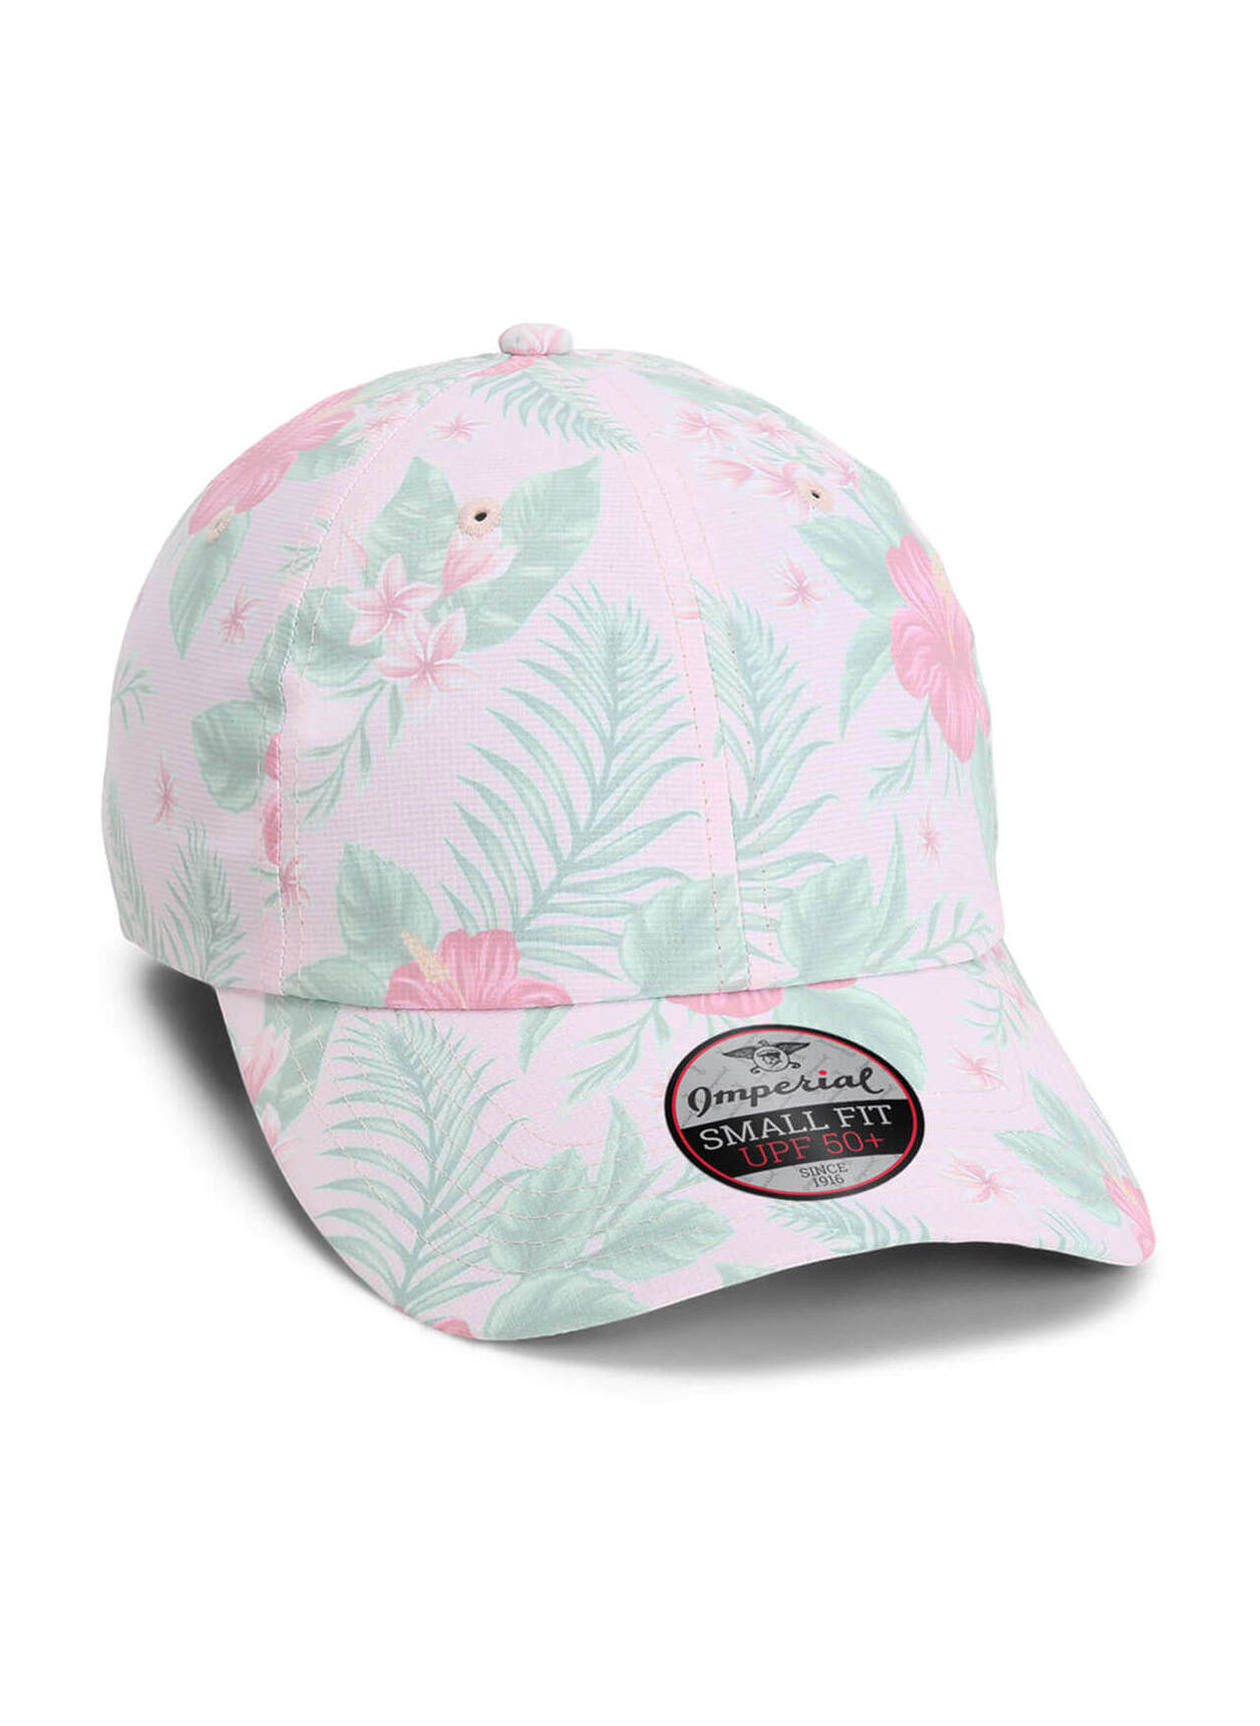 Imperial Kona Pink The Kona Small Fit Performance Hat